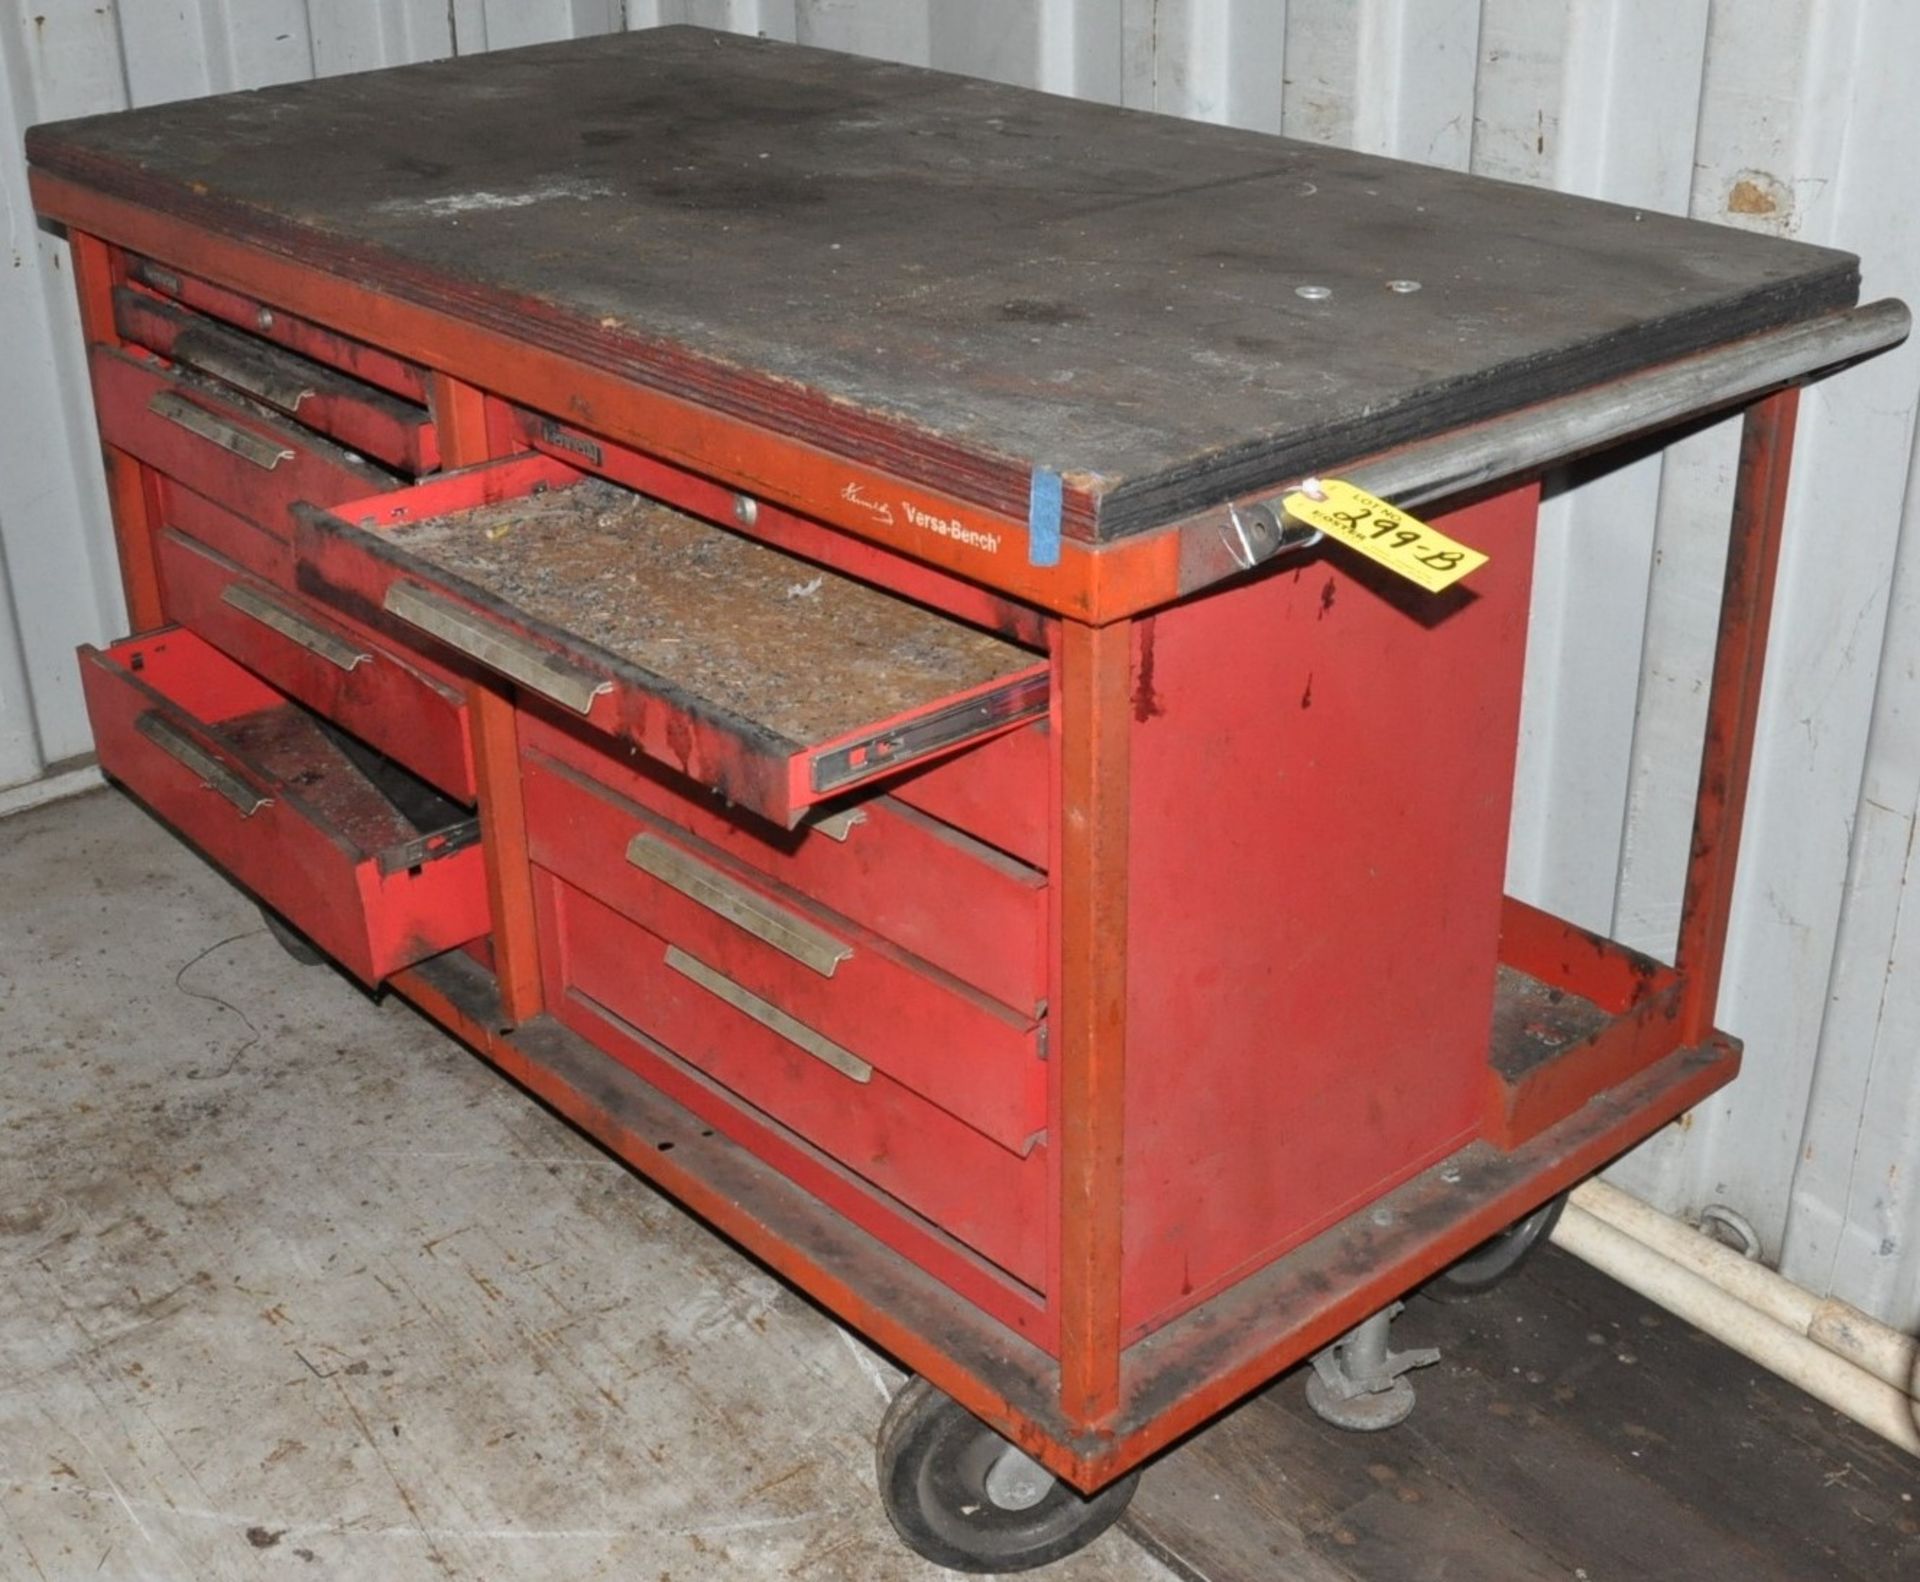 (2) KENNEDY 10-DRAWER PORTABLE TOOLING CABINET/BENCH CARTS, (INSIDE OVERSEAS CONTAINER LOT 301)